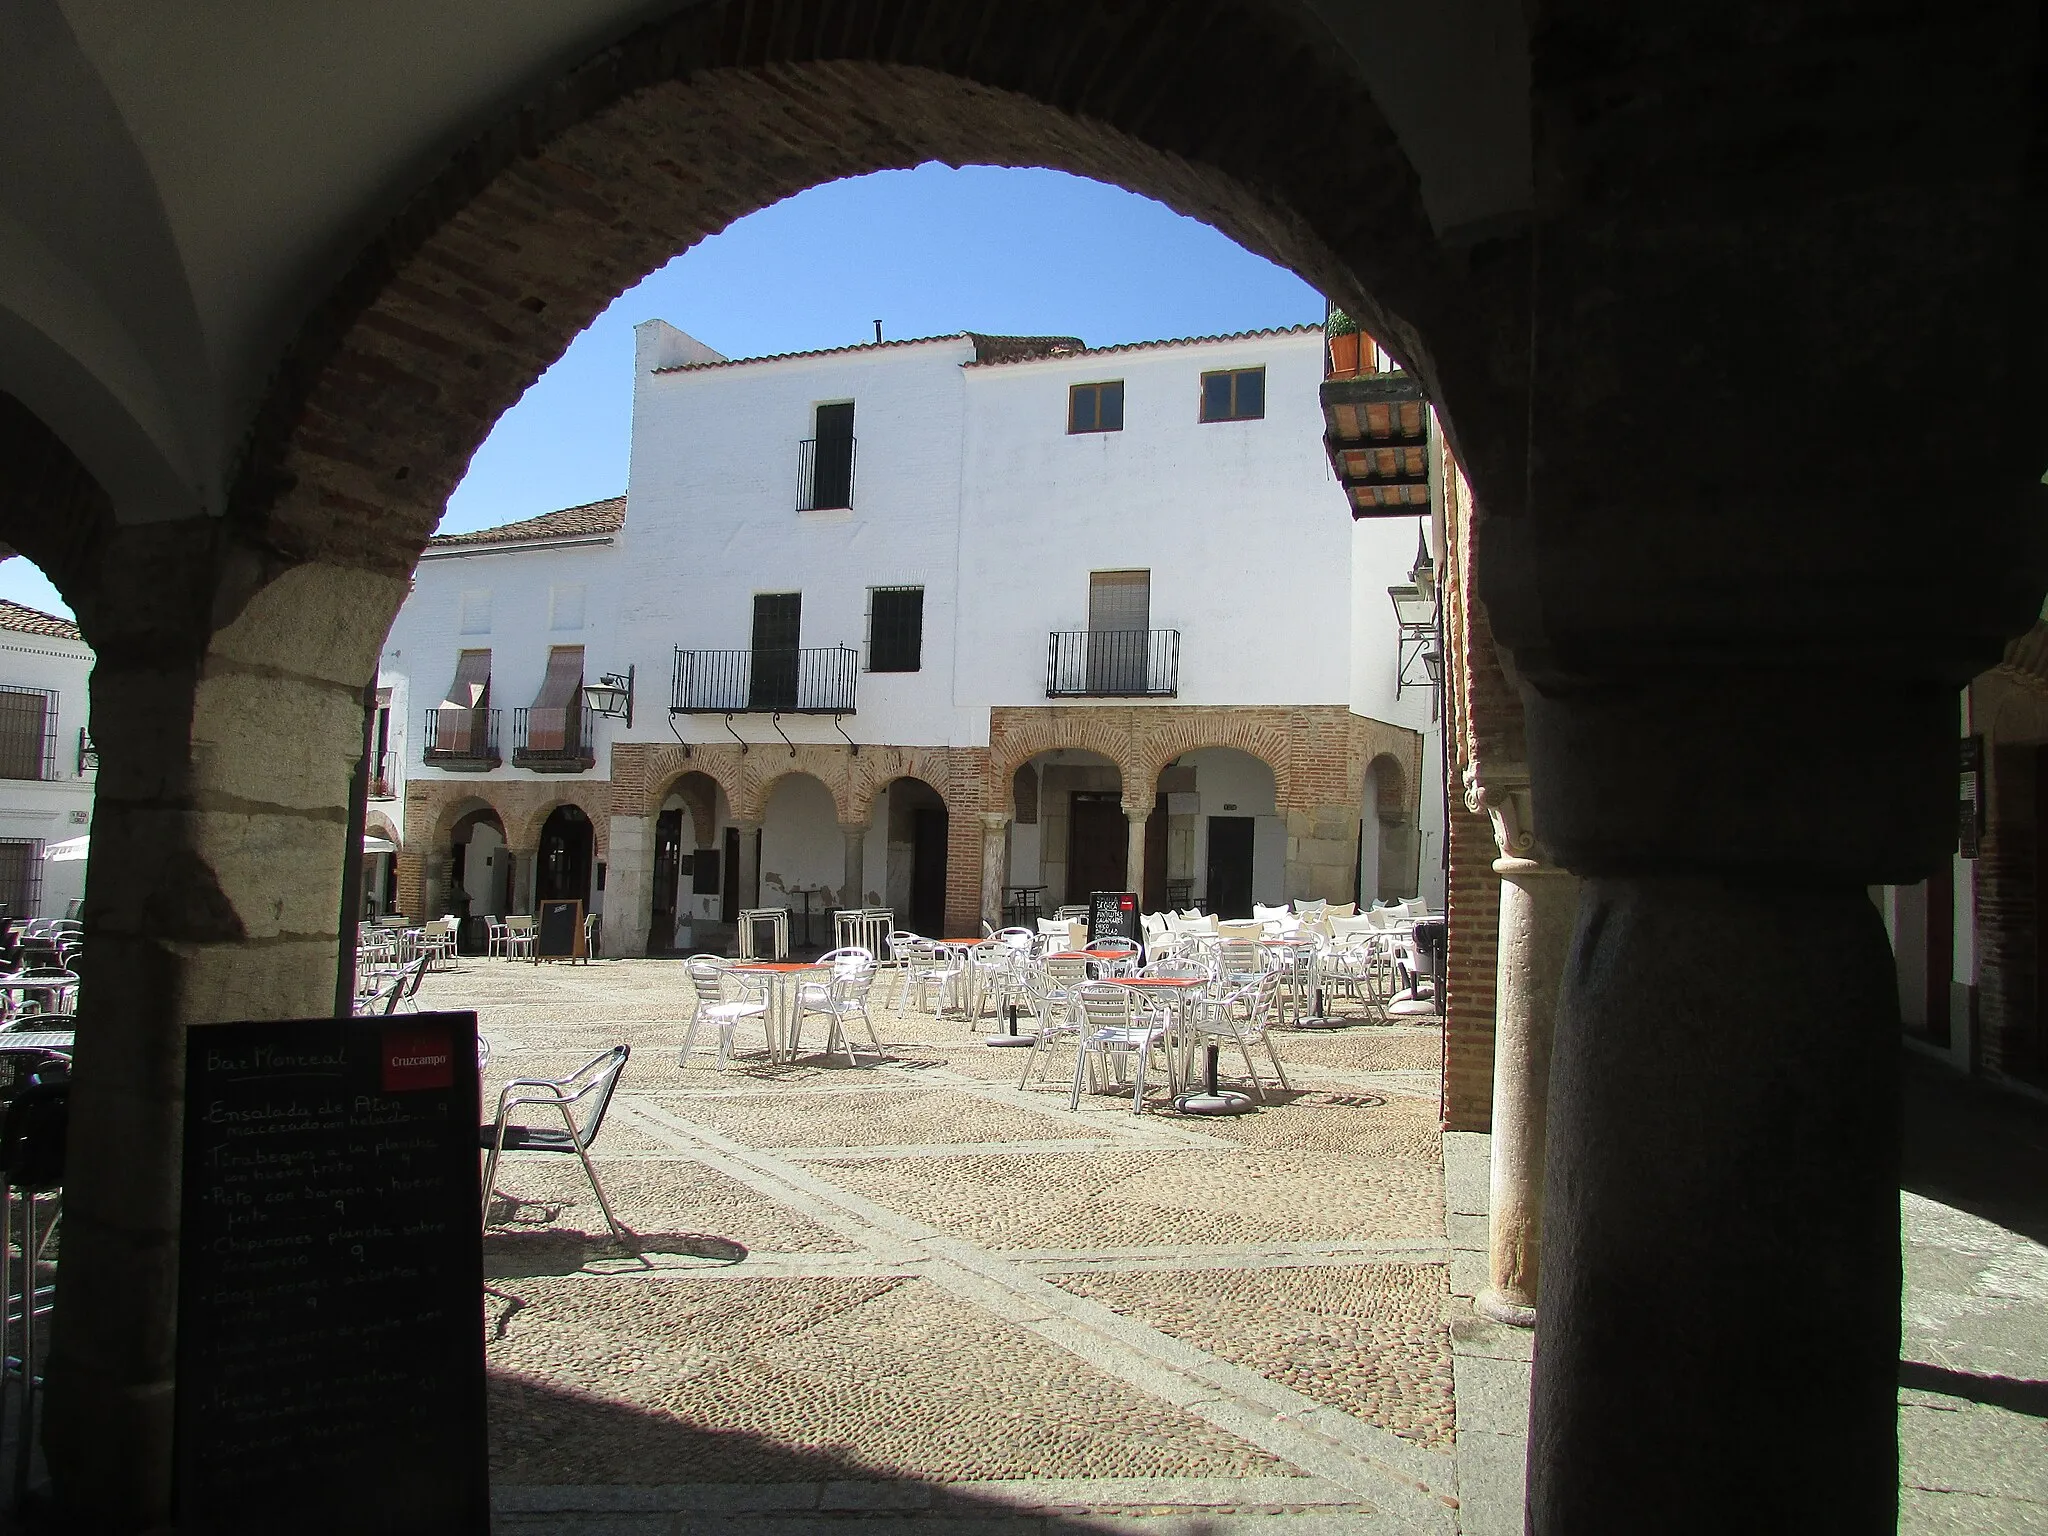 Photo showing: The Plaza Chica in the city of Zafra, Extremadura, Spain,